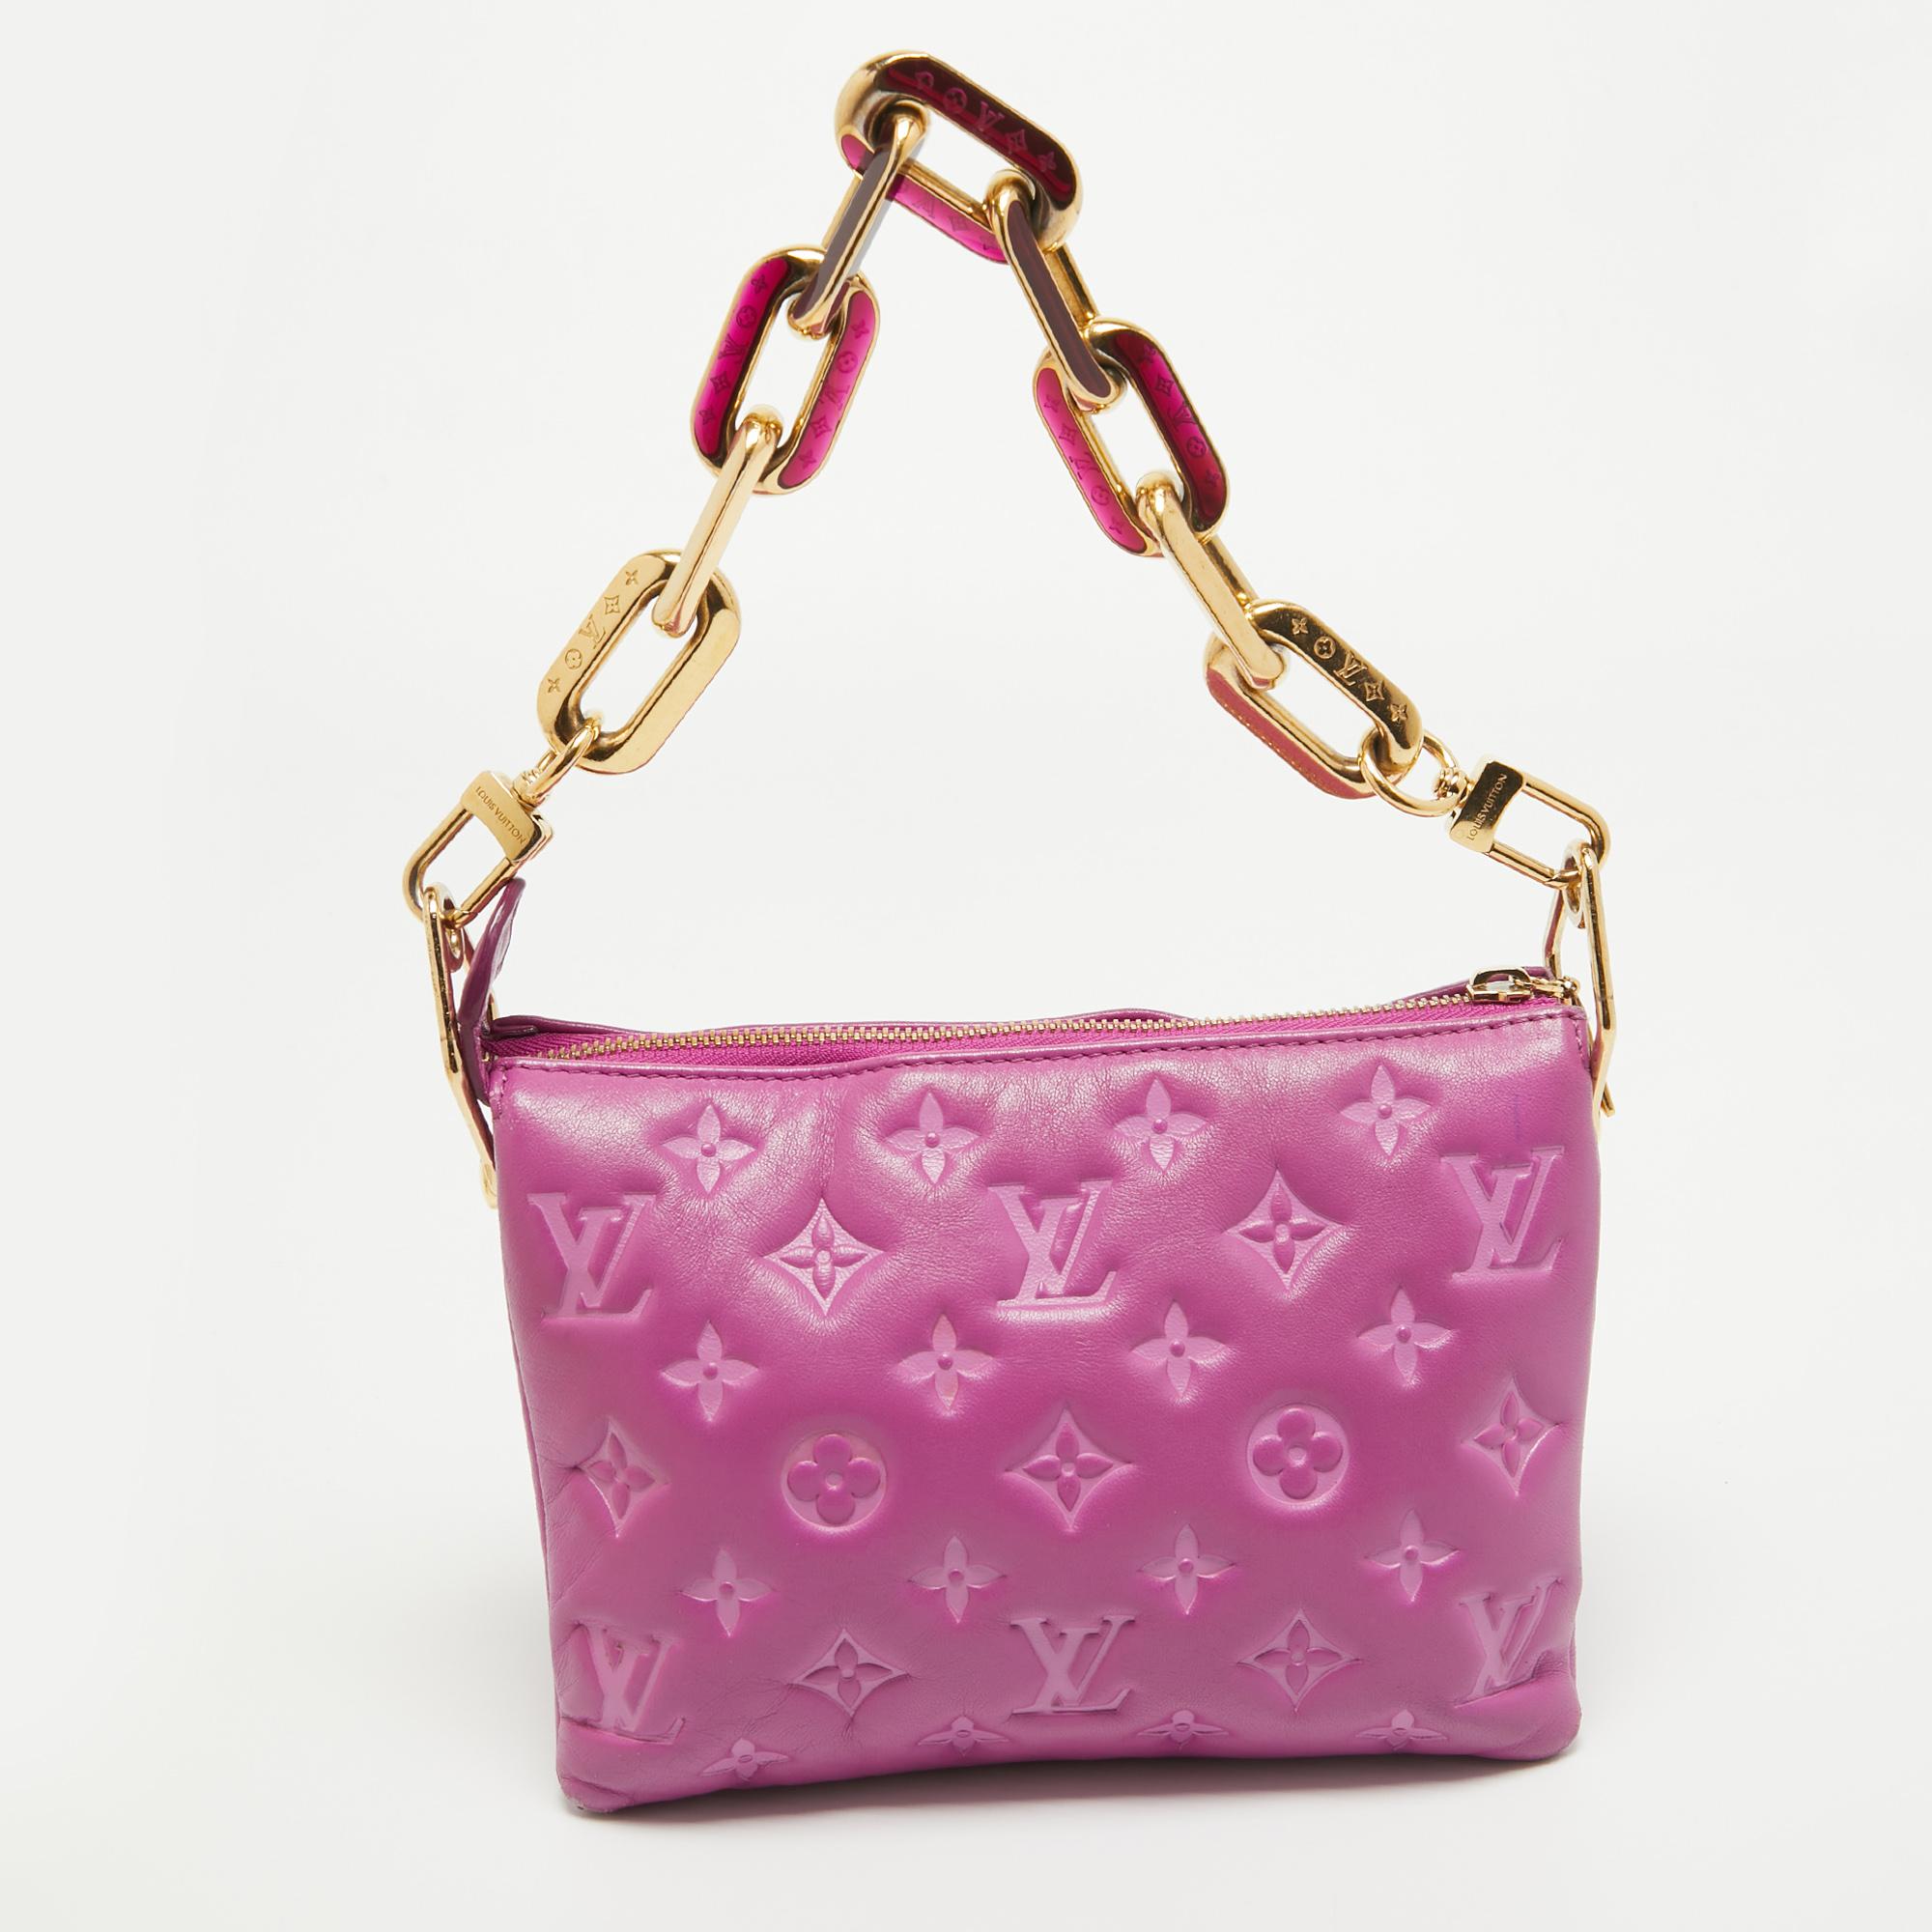 Presenting a classy Louis Vuitton leather bag to own this season and the ones after. It has a Monogram exterior and a lined interior for all your essentials. A must-have in your collection, this bag will represent your fabulous fashion